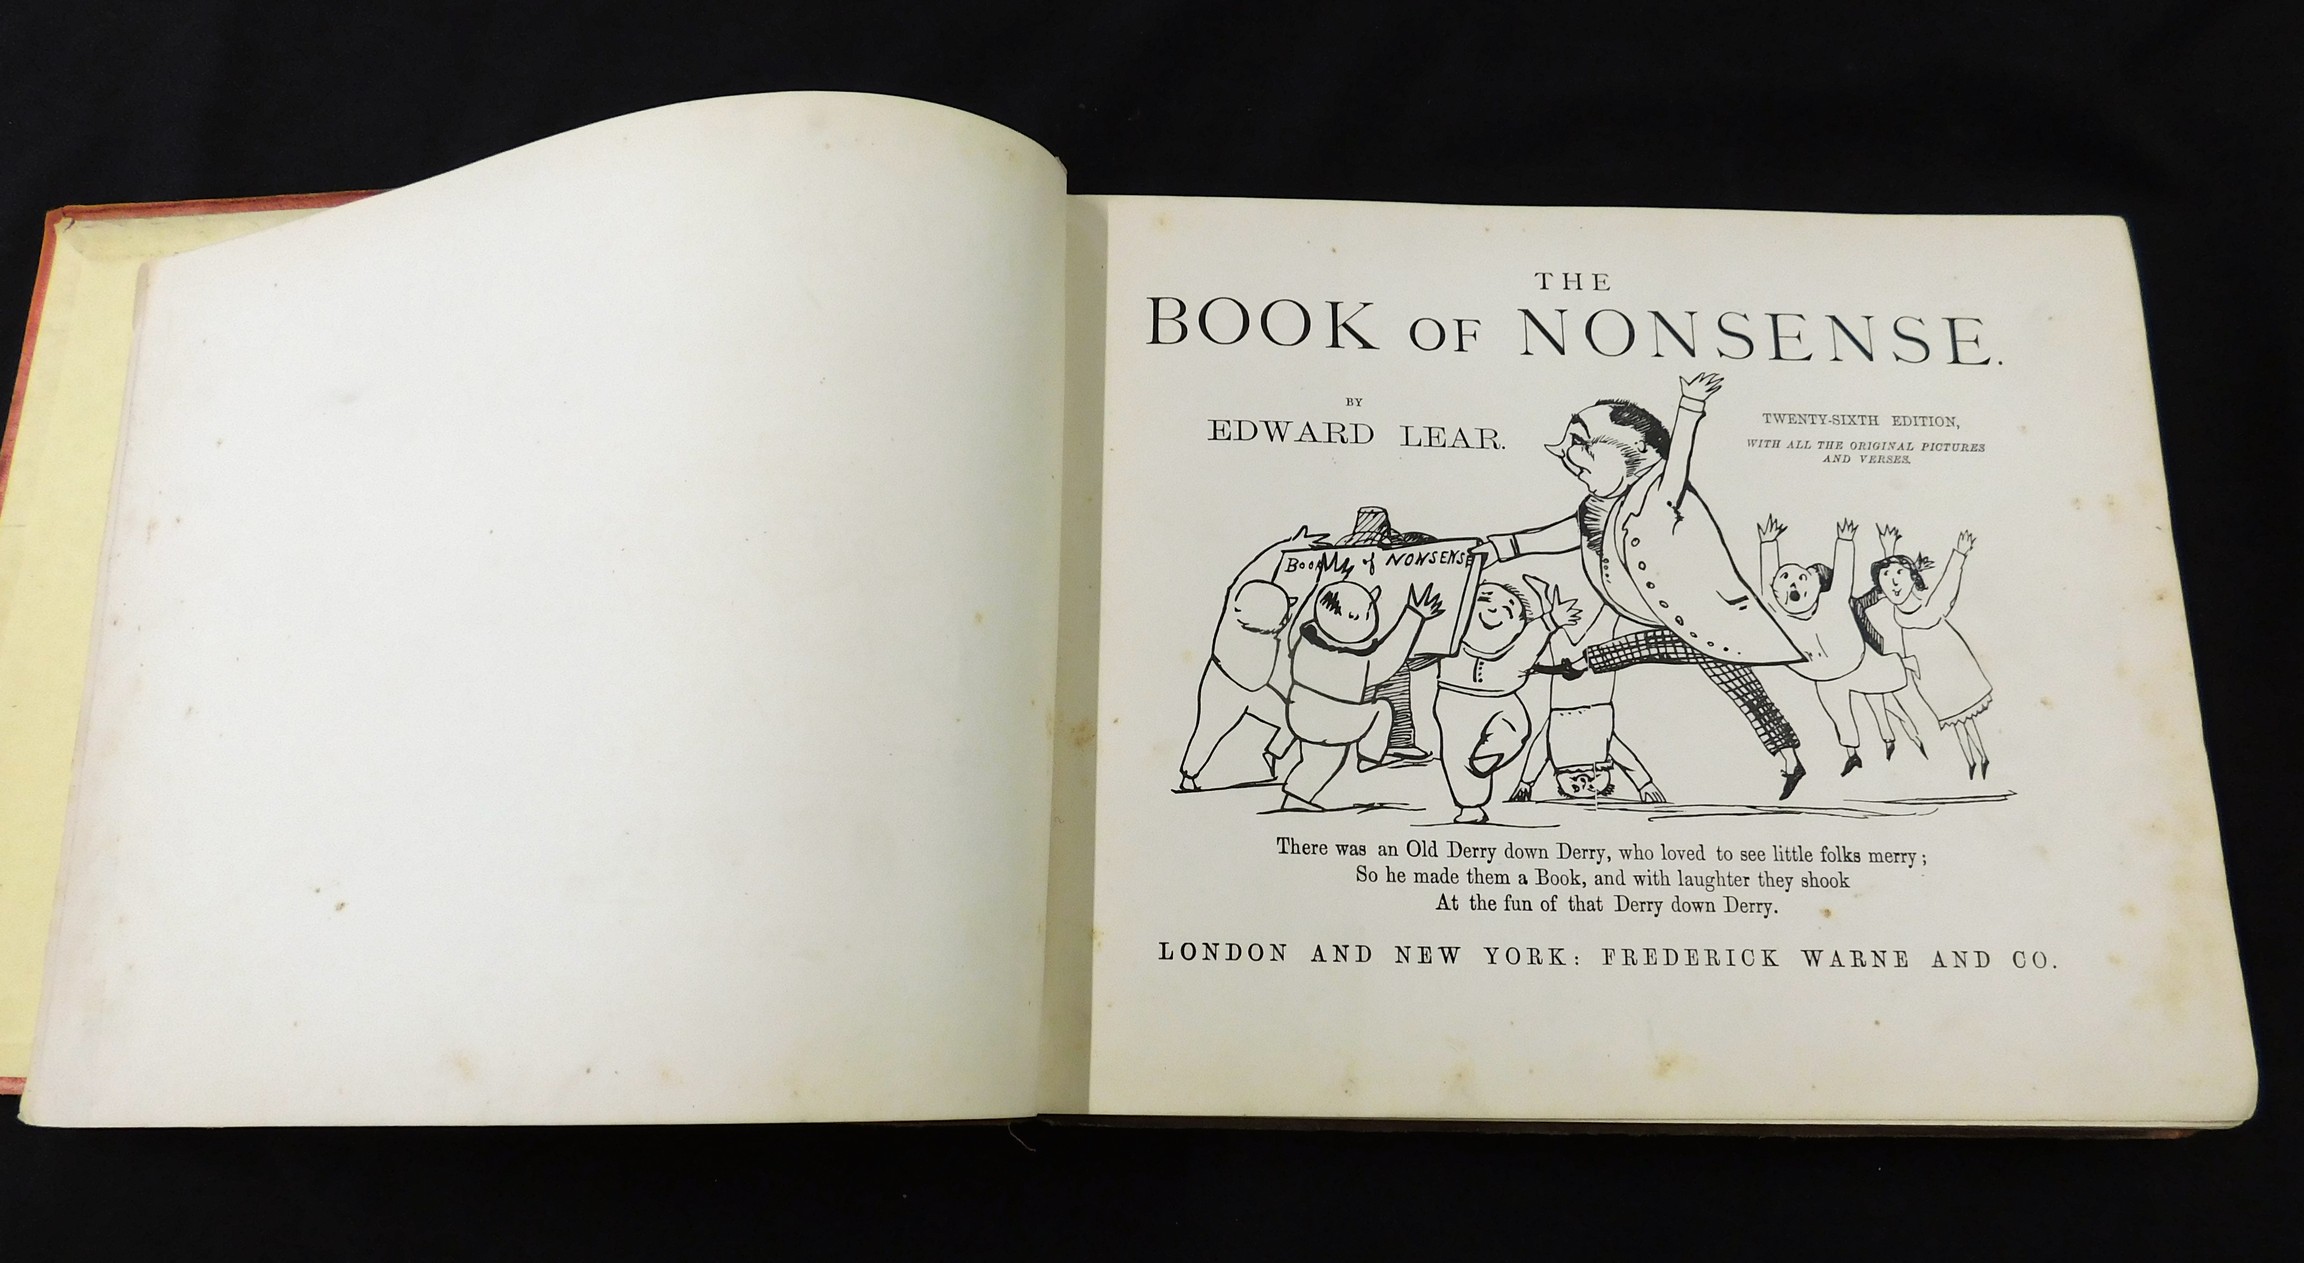 EDWARD LEAR: THE BOOK OF NONSENSE, London and New York, Frederick Warne, circa 1888, 26th edition, - Image 2 of 3